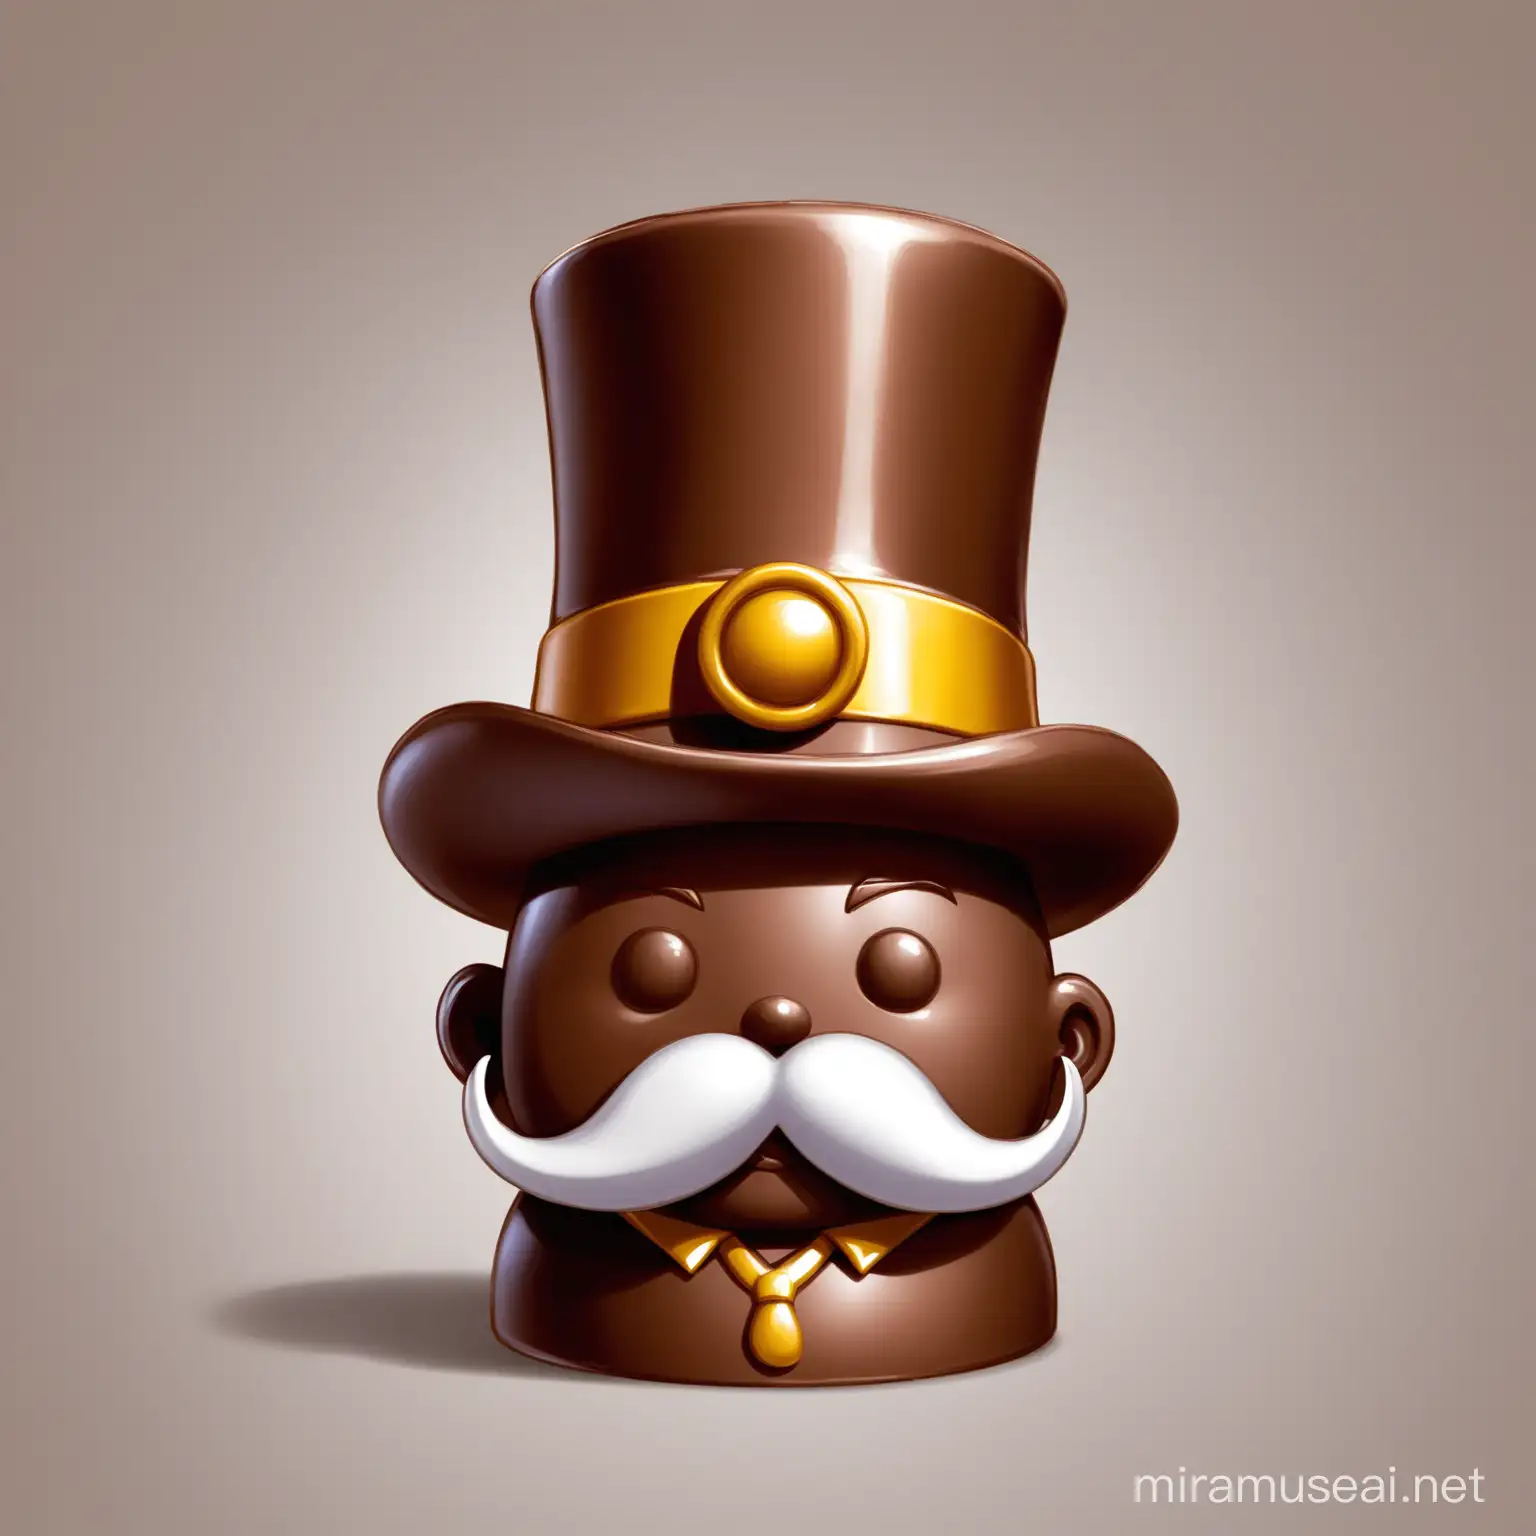 Charming Chocolate Gentleman Accessorized with Hat Monocle and Moustache